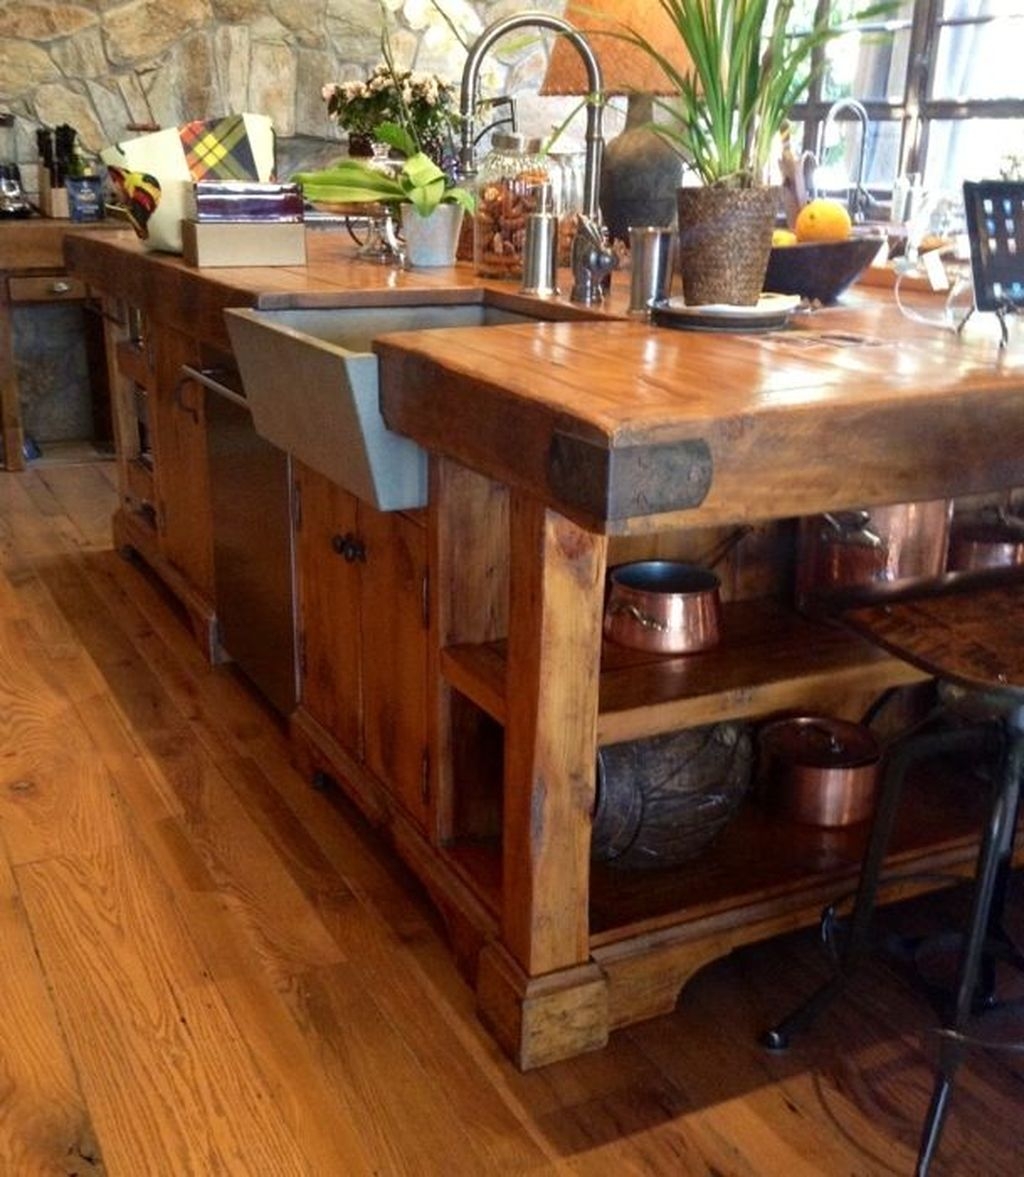 Awesome Rustic Kitchen Island Design Ideas 07 